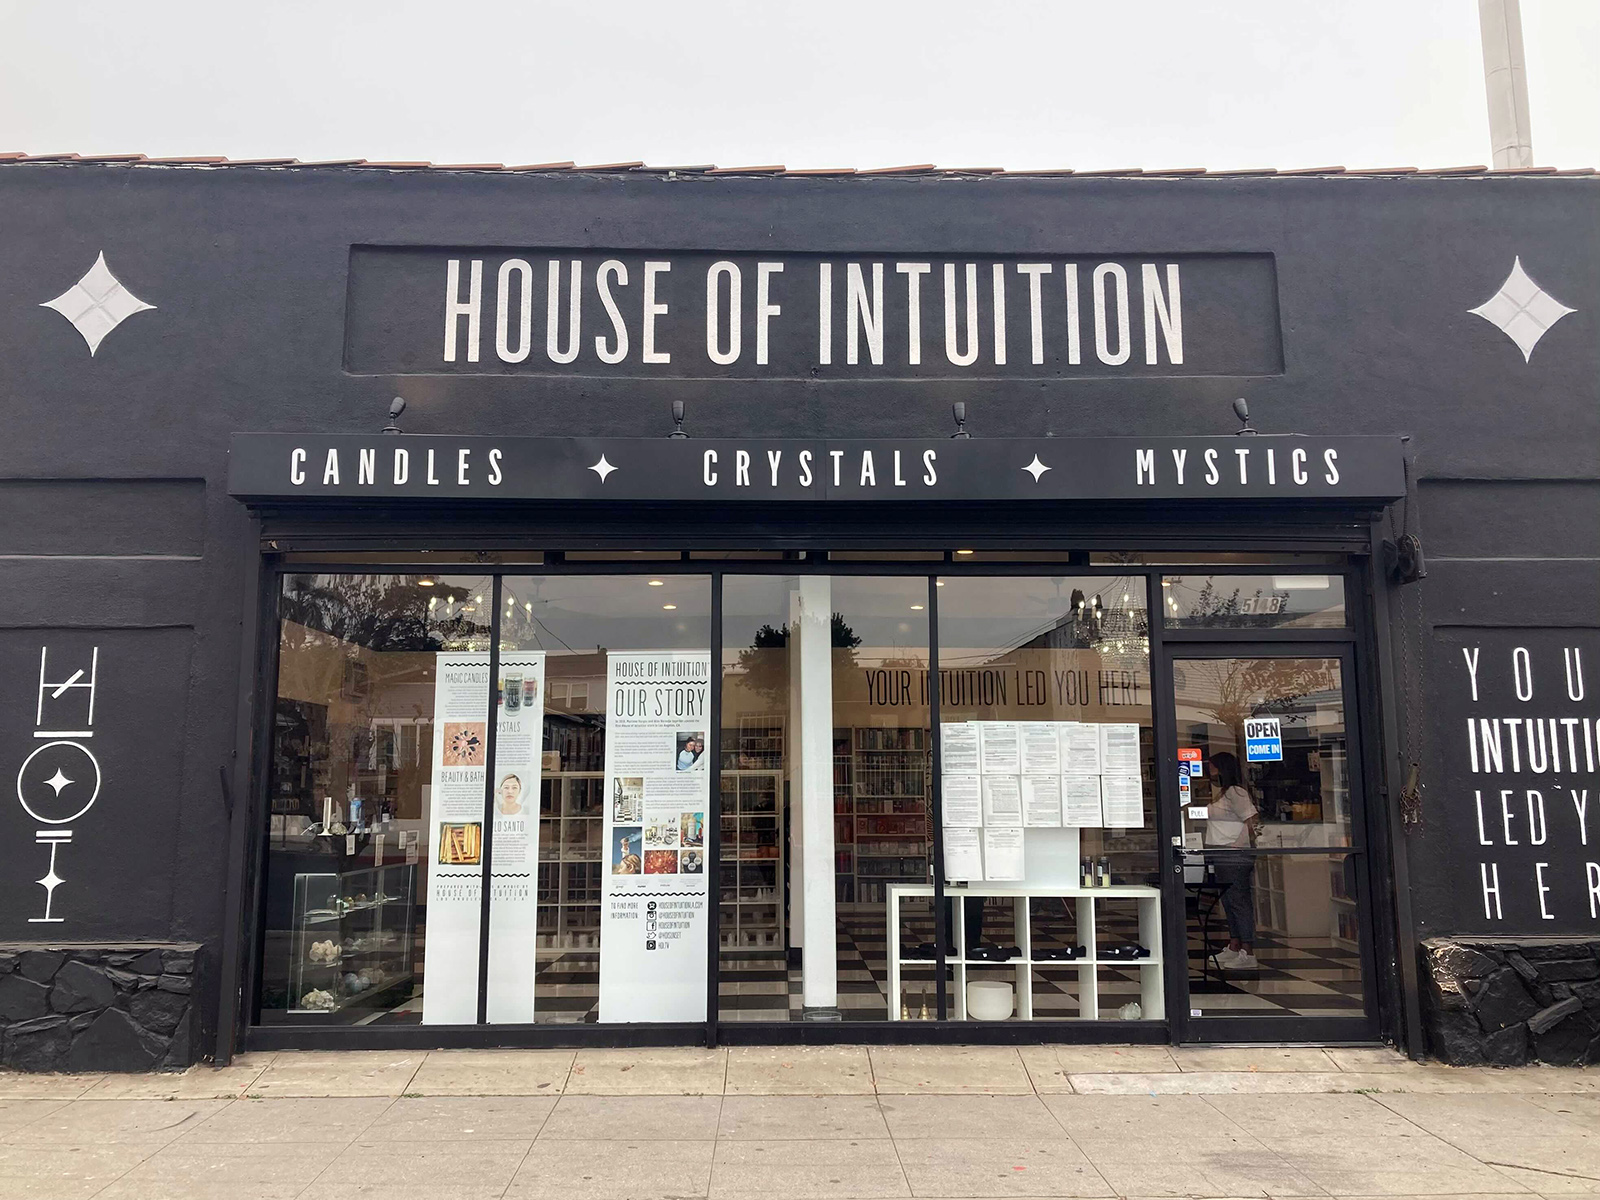 The House of Intuition is a metaphysical brand with stores in California and Florida. This store is in the Los Angeles neighborhood of Highland Park. RNS photo by Alejandra Molina